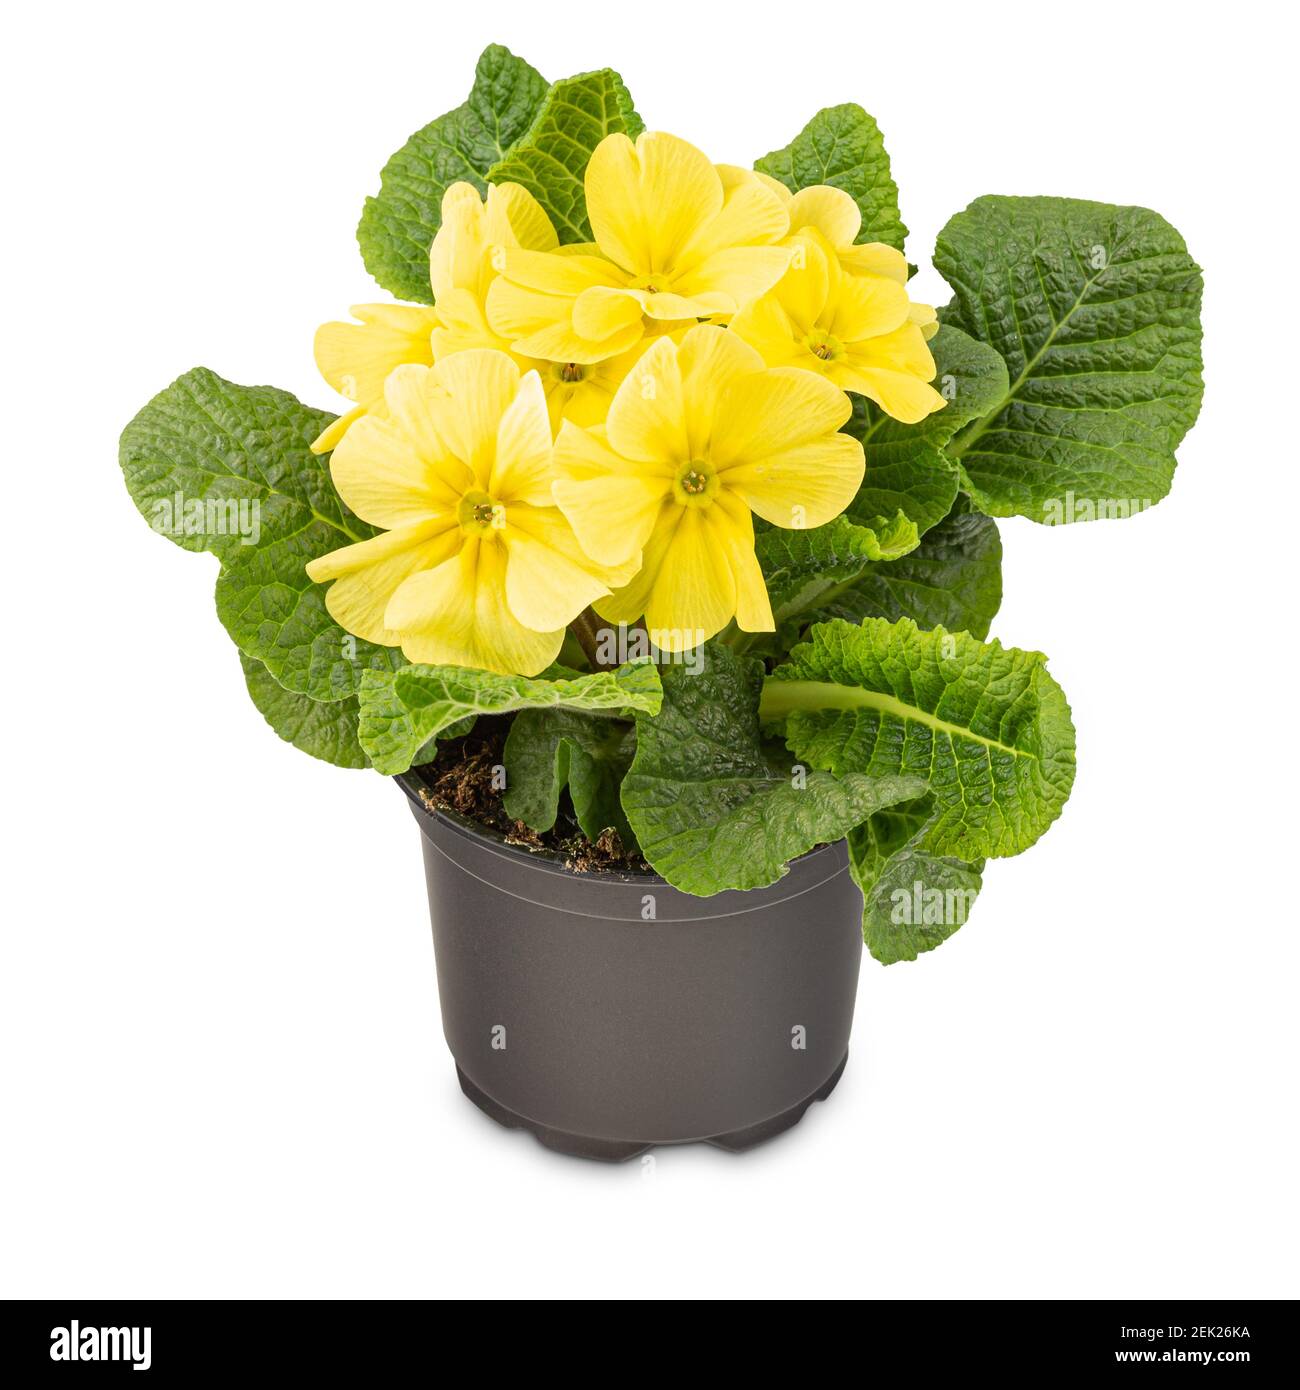 Primrose or Primula vulgaris, one the first flowers to bloom in spring, on white background Stock Photo